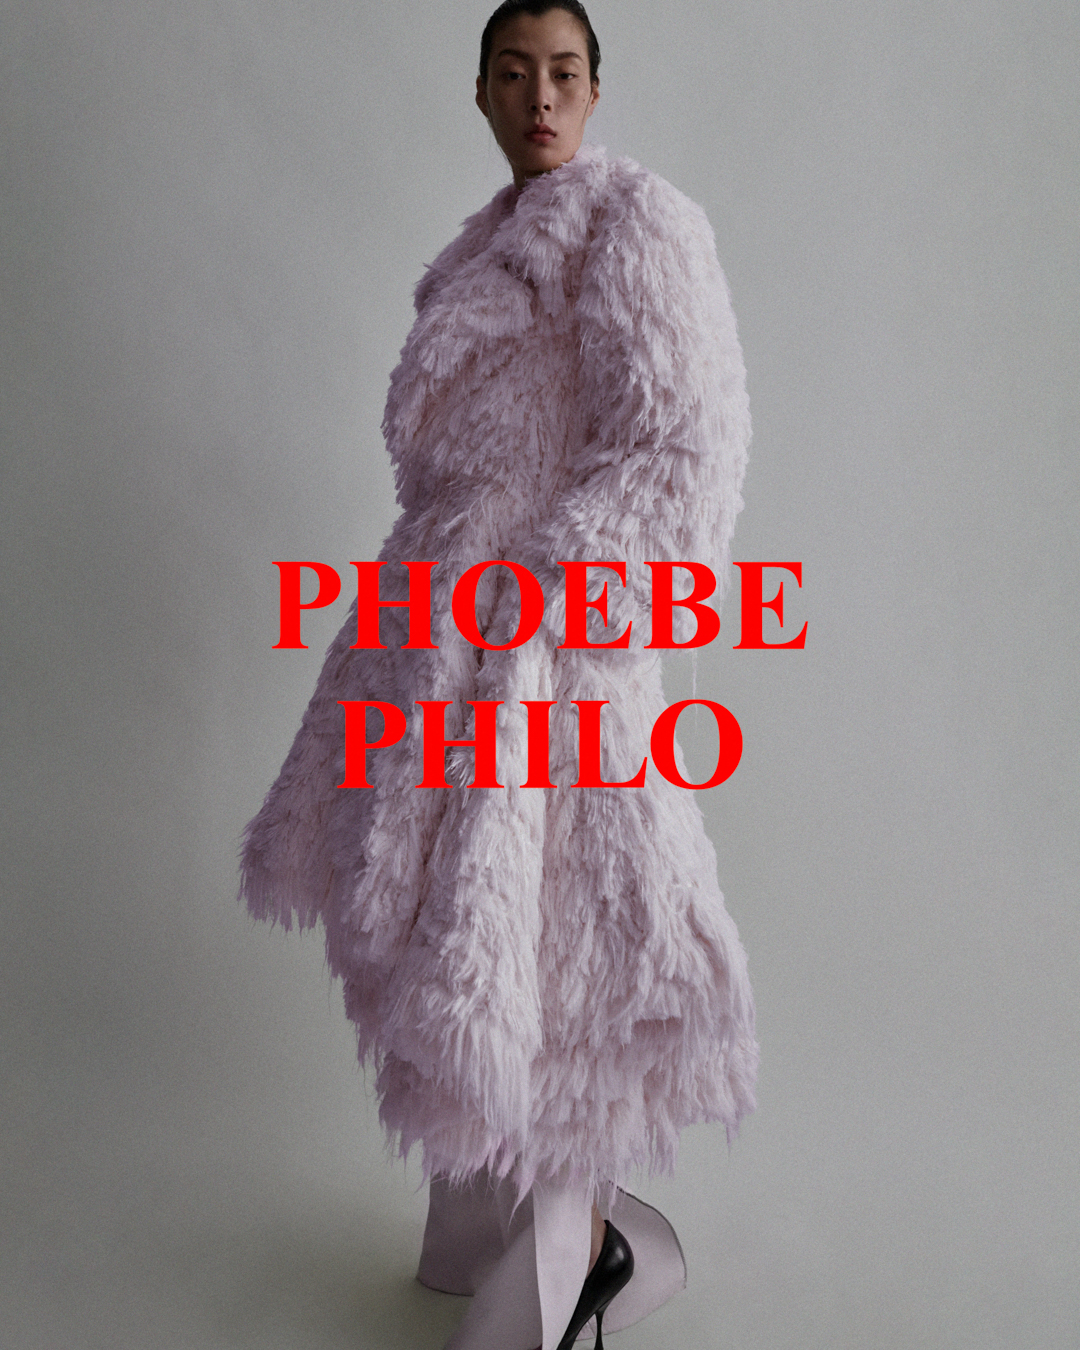 Phoebe Philo and Daria Werbowy to reunite for Philo's collection